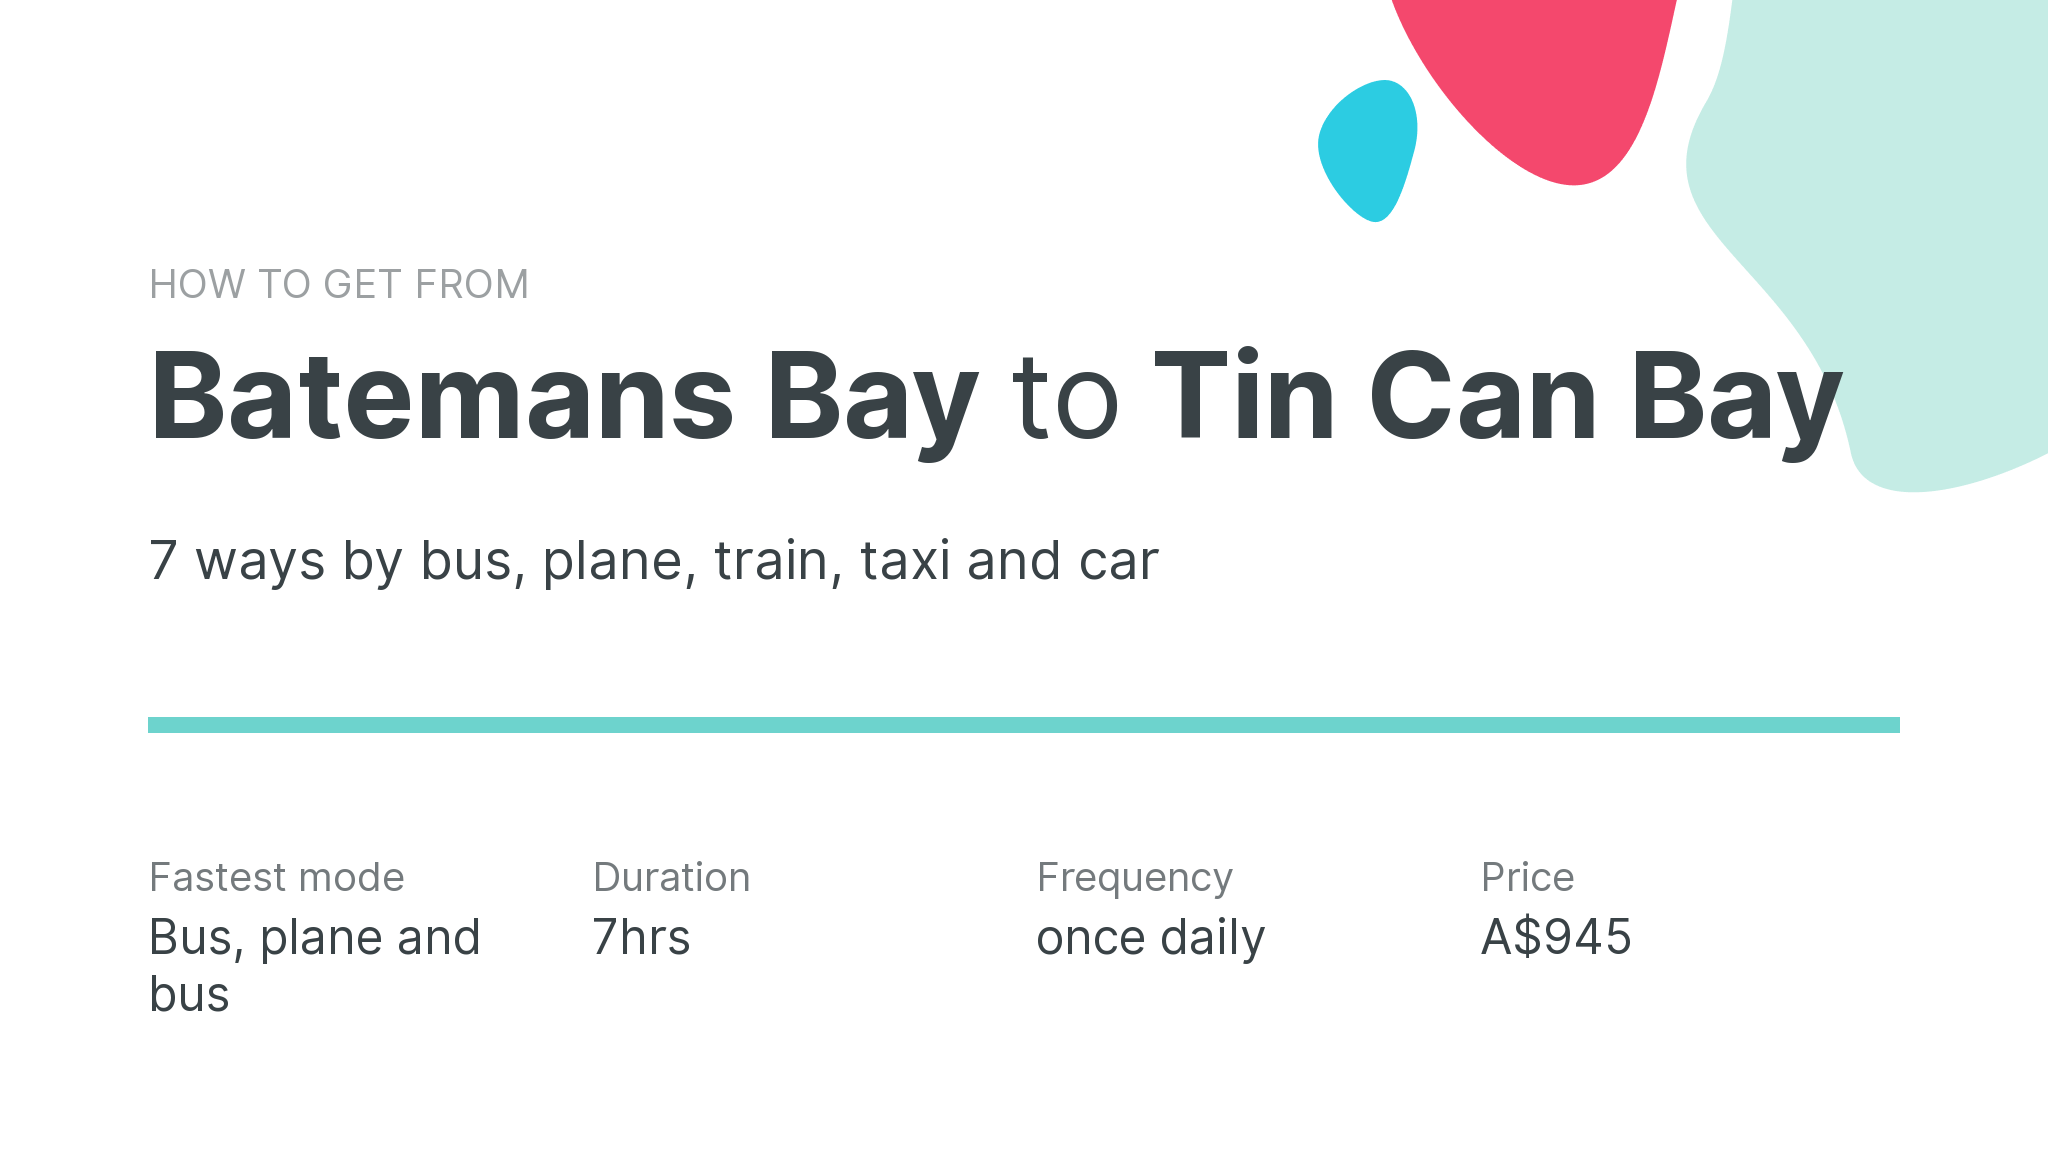 How do I get from Batemans Bay to Tin Can Bay